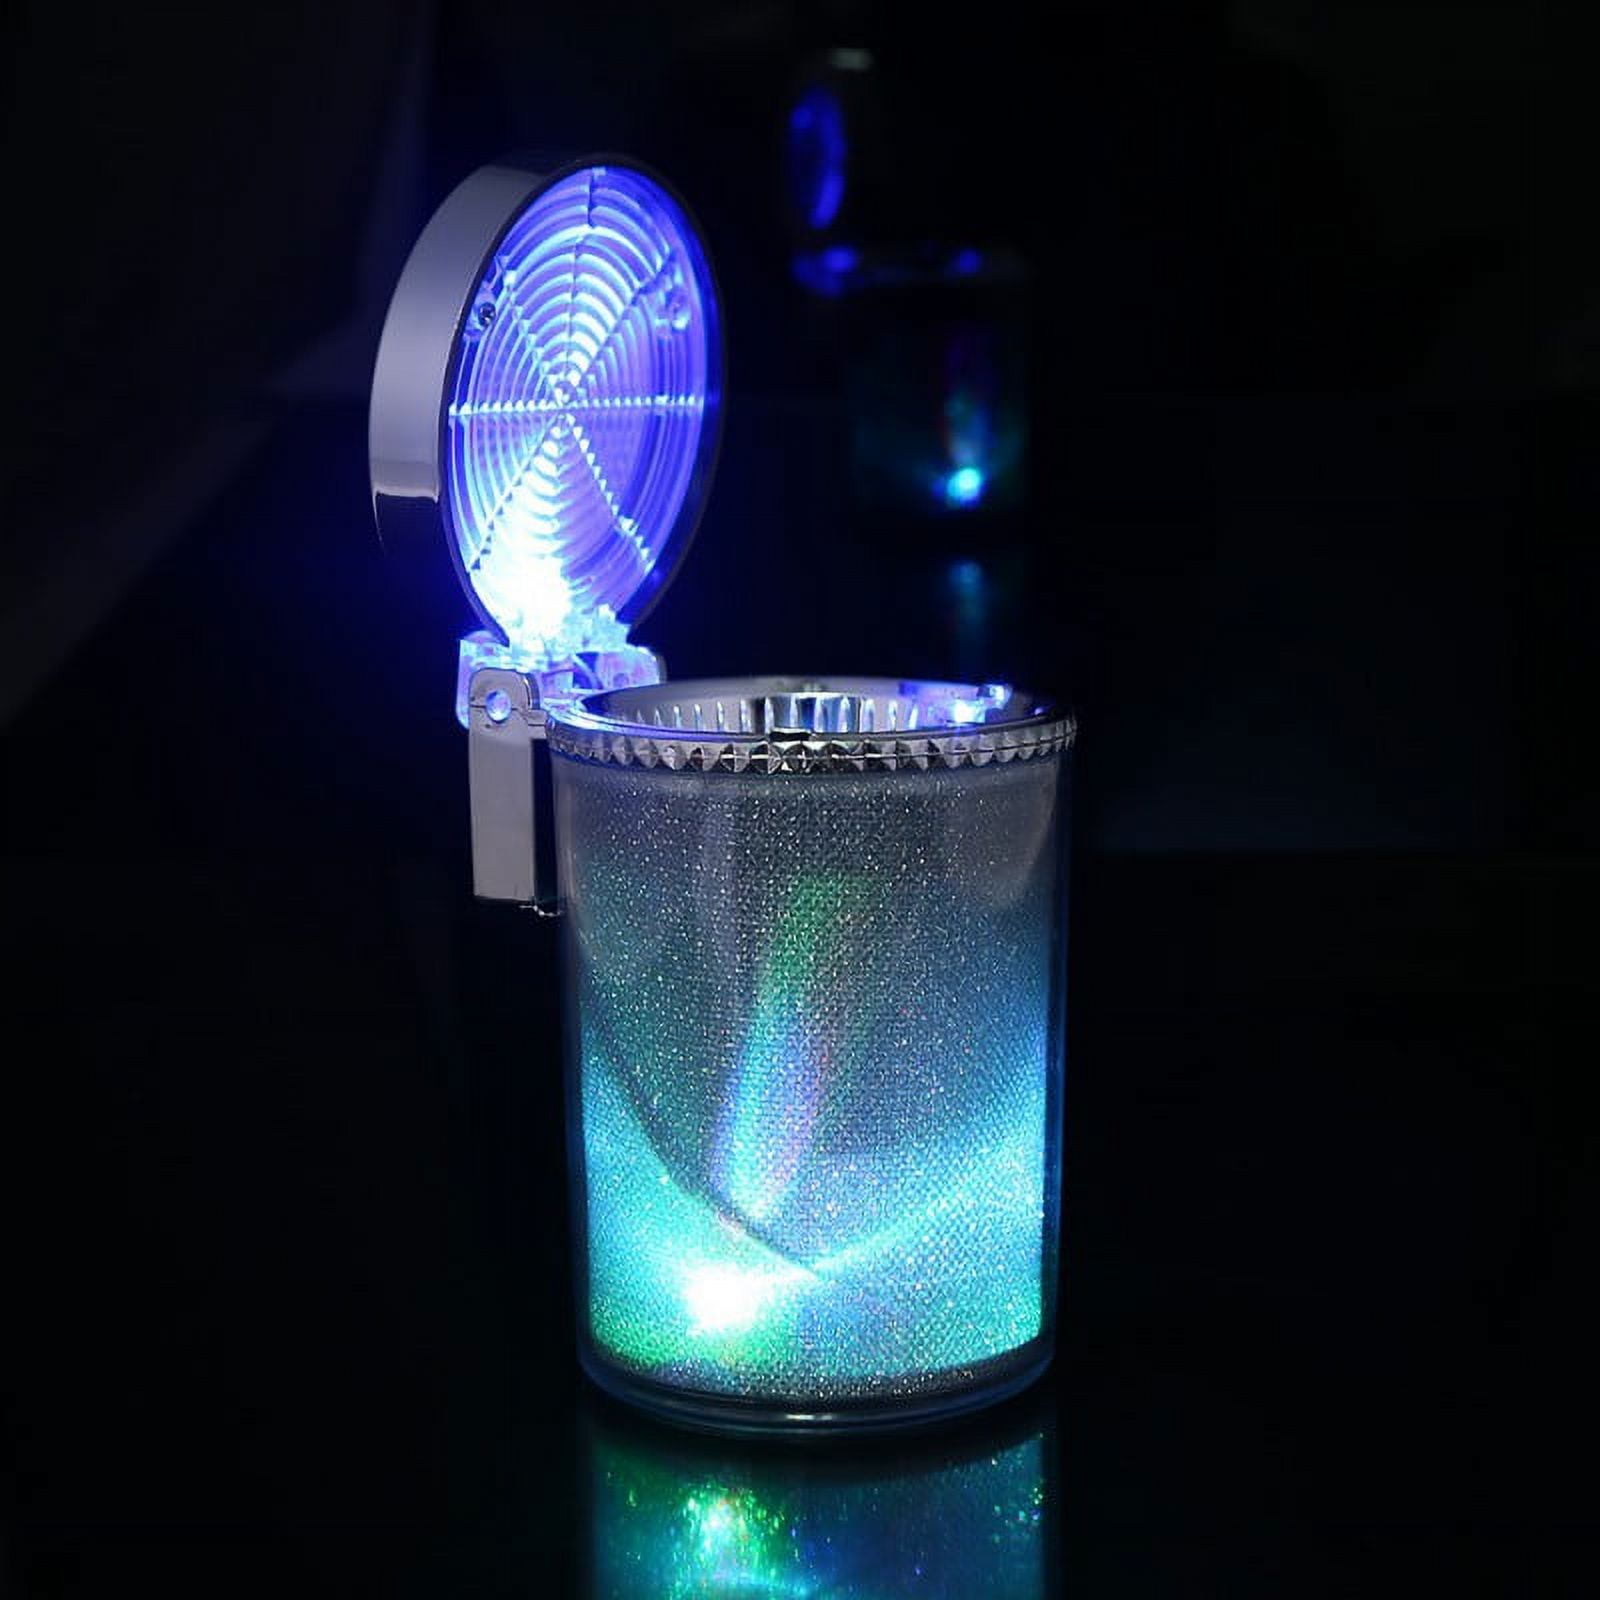 LED Light Car Ashtray Luminous Glow in the Dark Cylinder Container